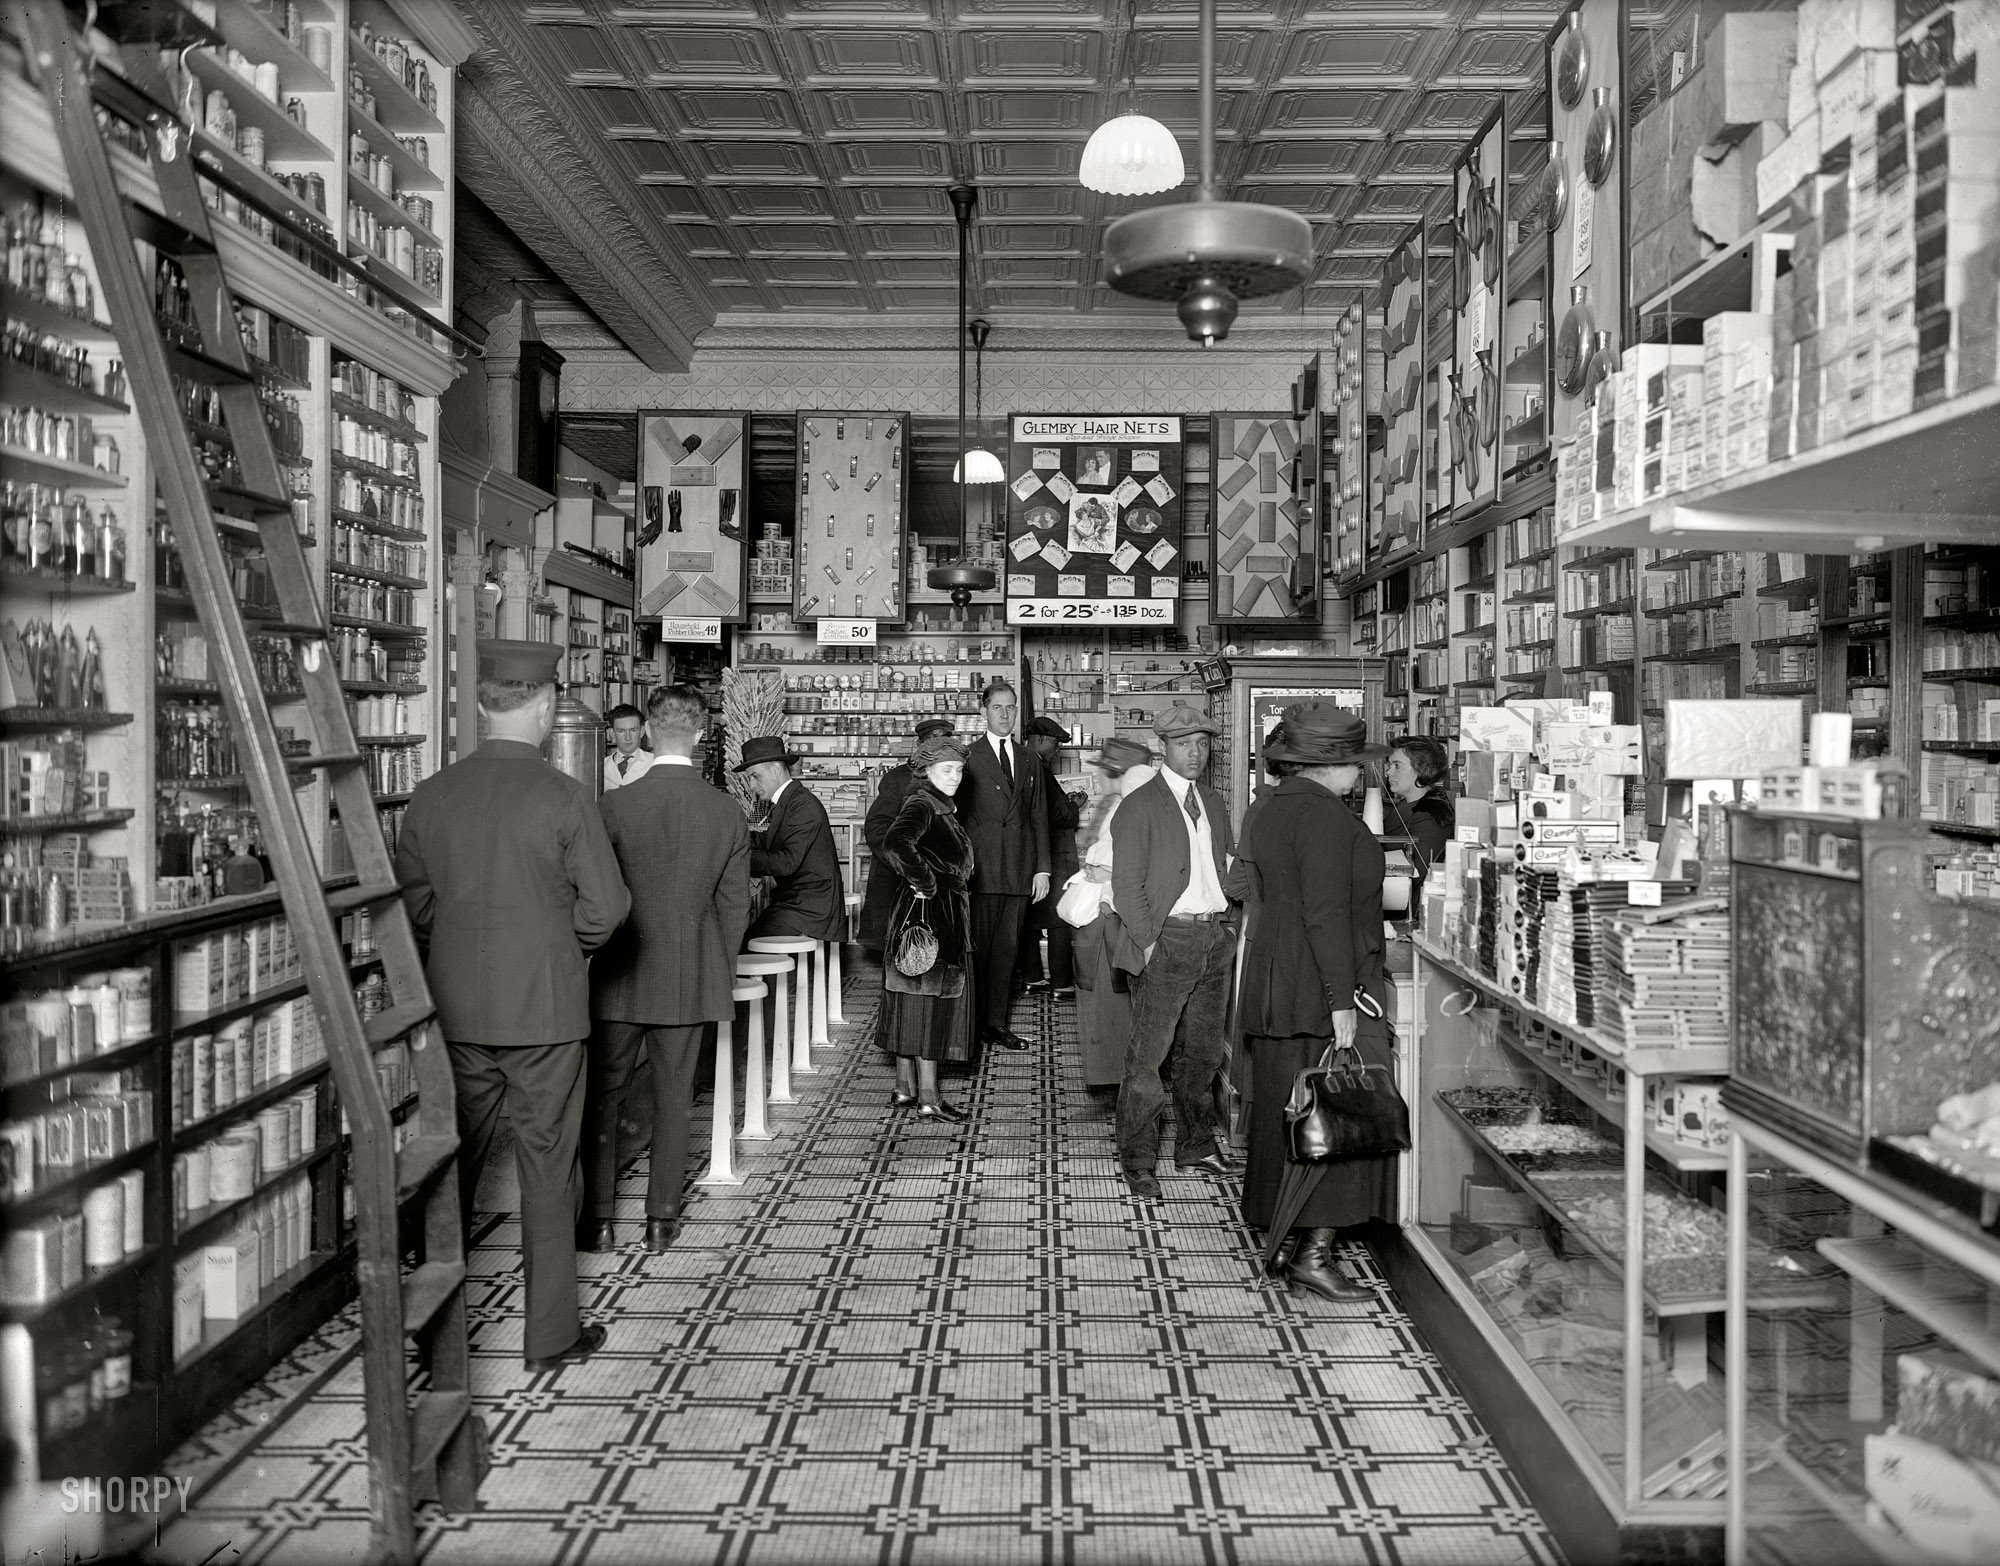 Washington circa 1920. "People's Drug Store, interior, 14th and U streets." We're happy to report that this branch upholds People's reputation as a purveyor of such household essentials as Glemby Hair Nets, hot water bottles and scary black rubber gloves. National Photo Company glass negative. View full size.